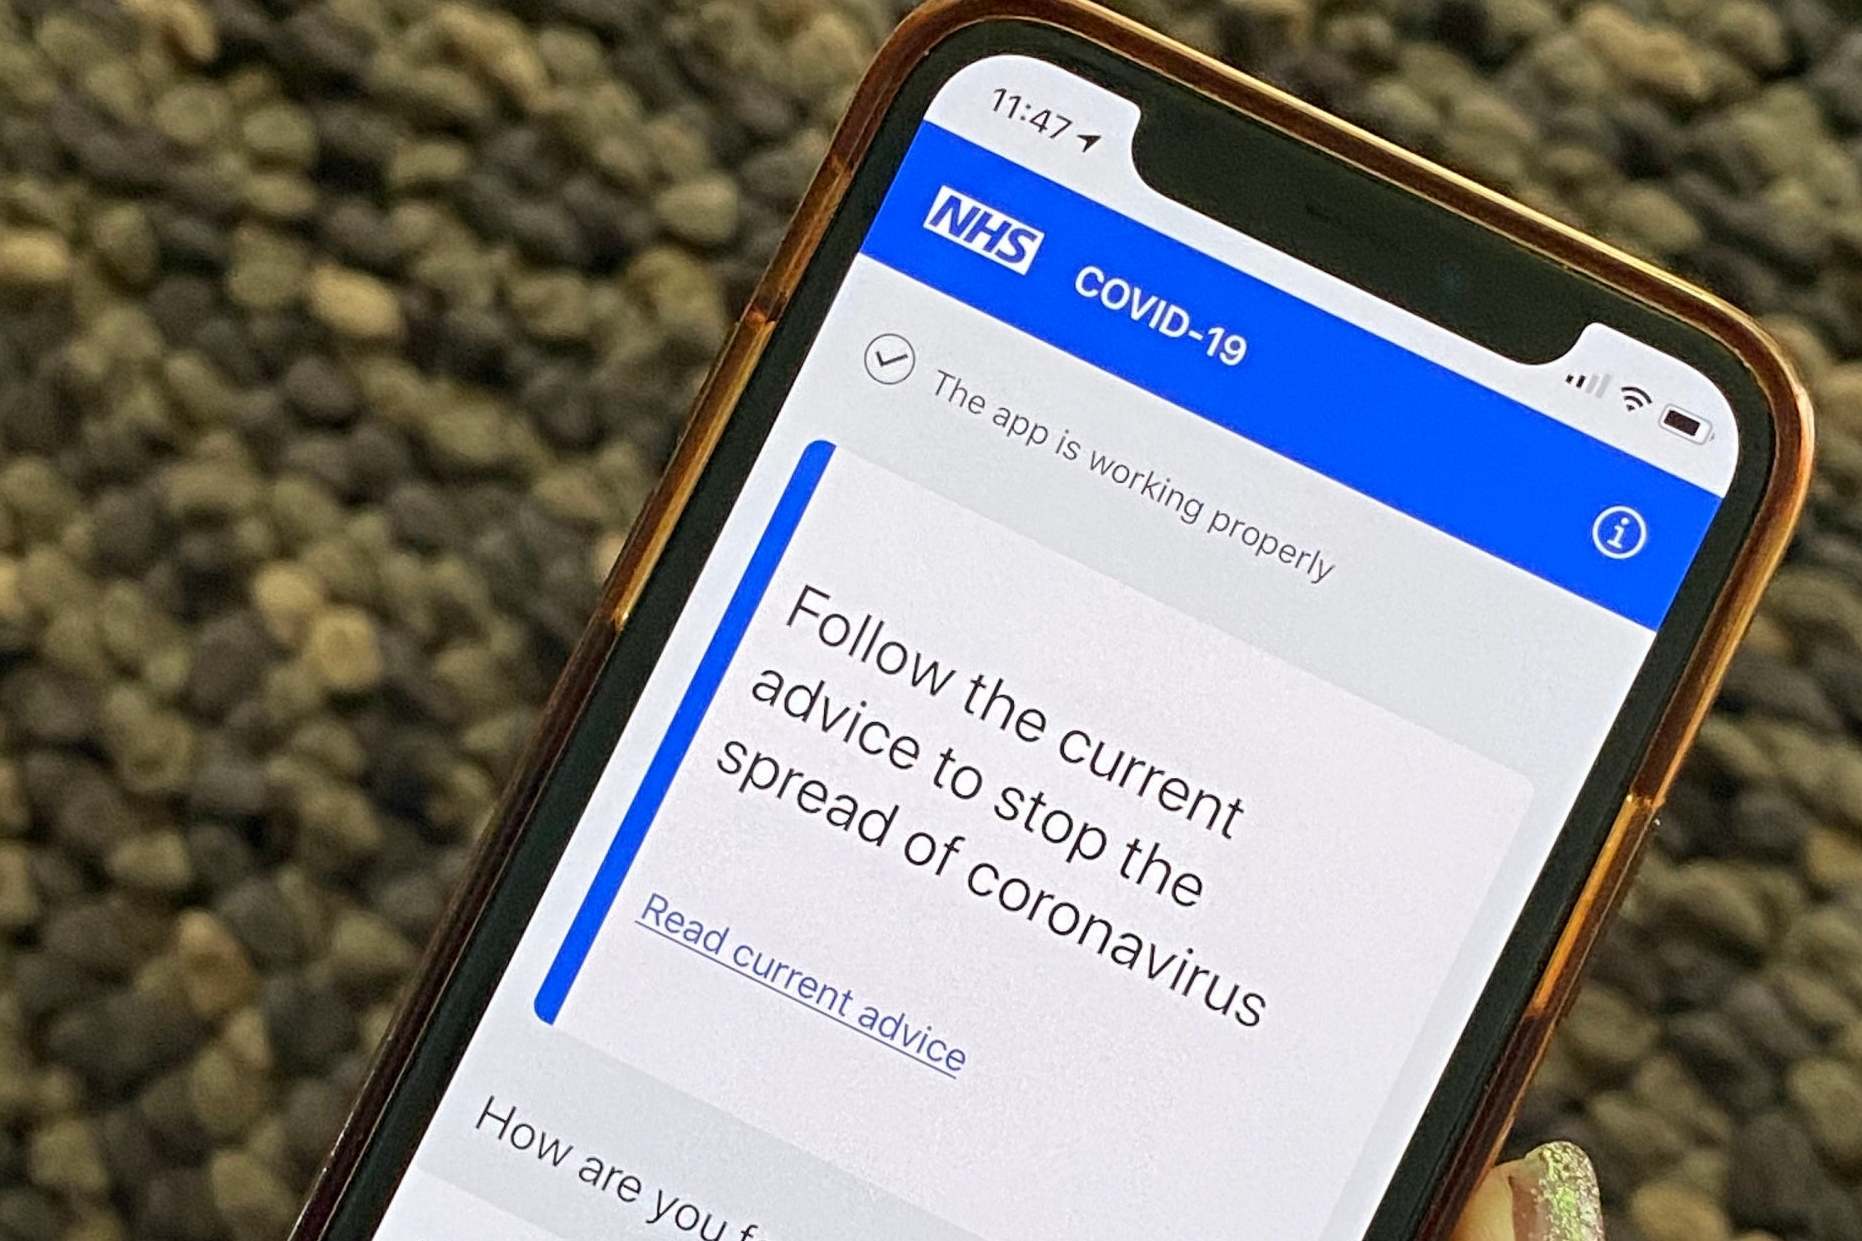 Coronavirus contact-tracing apps could pose major privacy risk, Amnesty warns